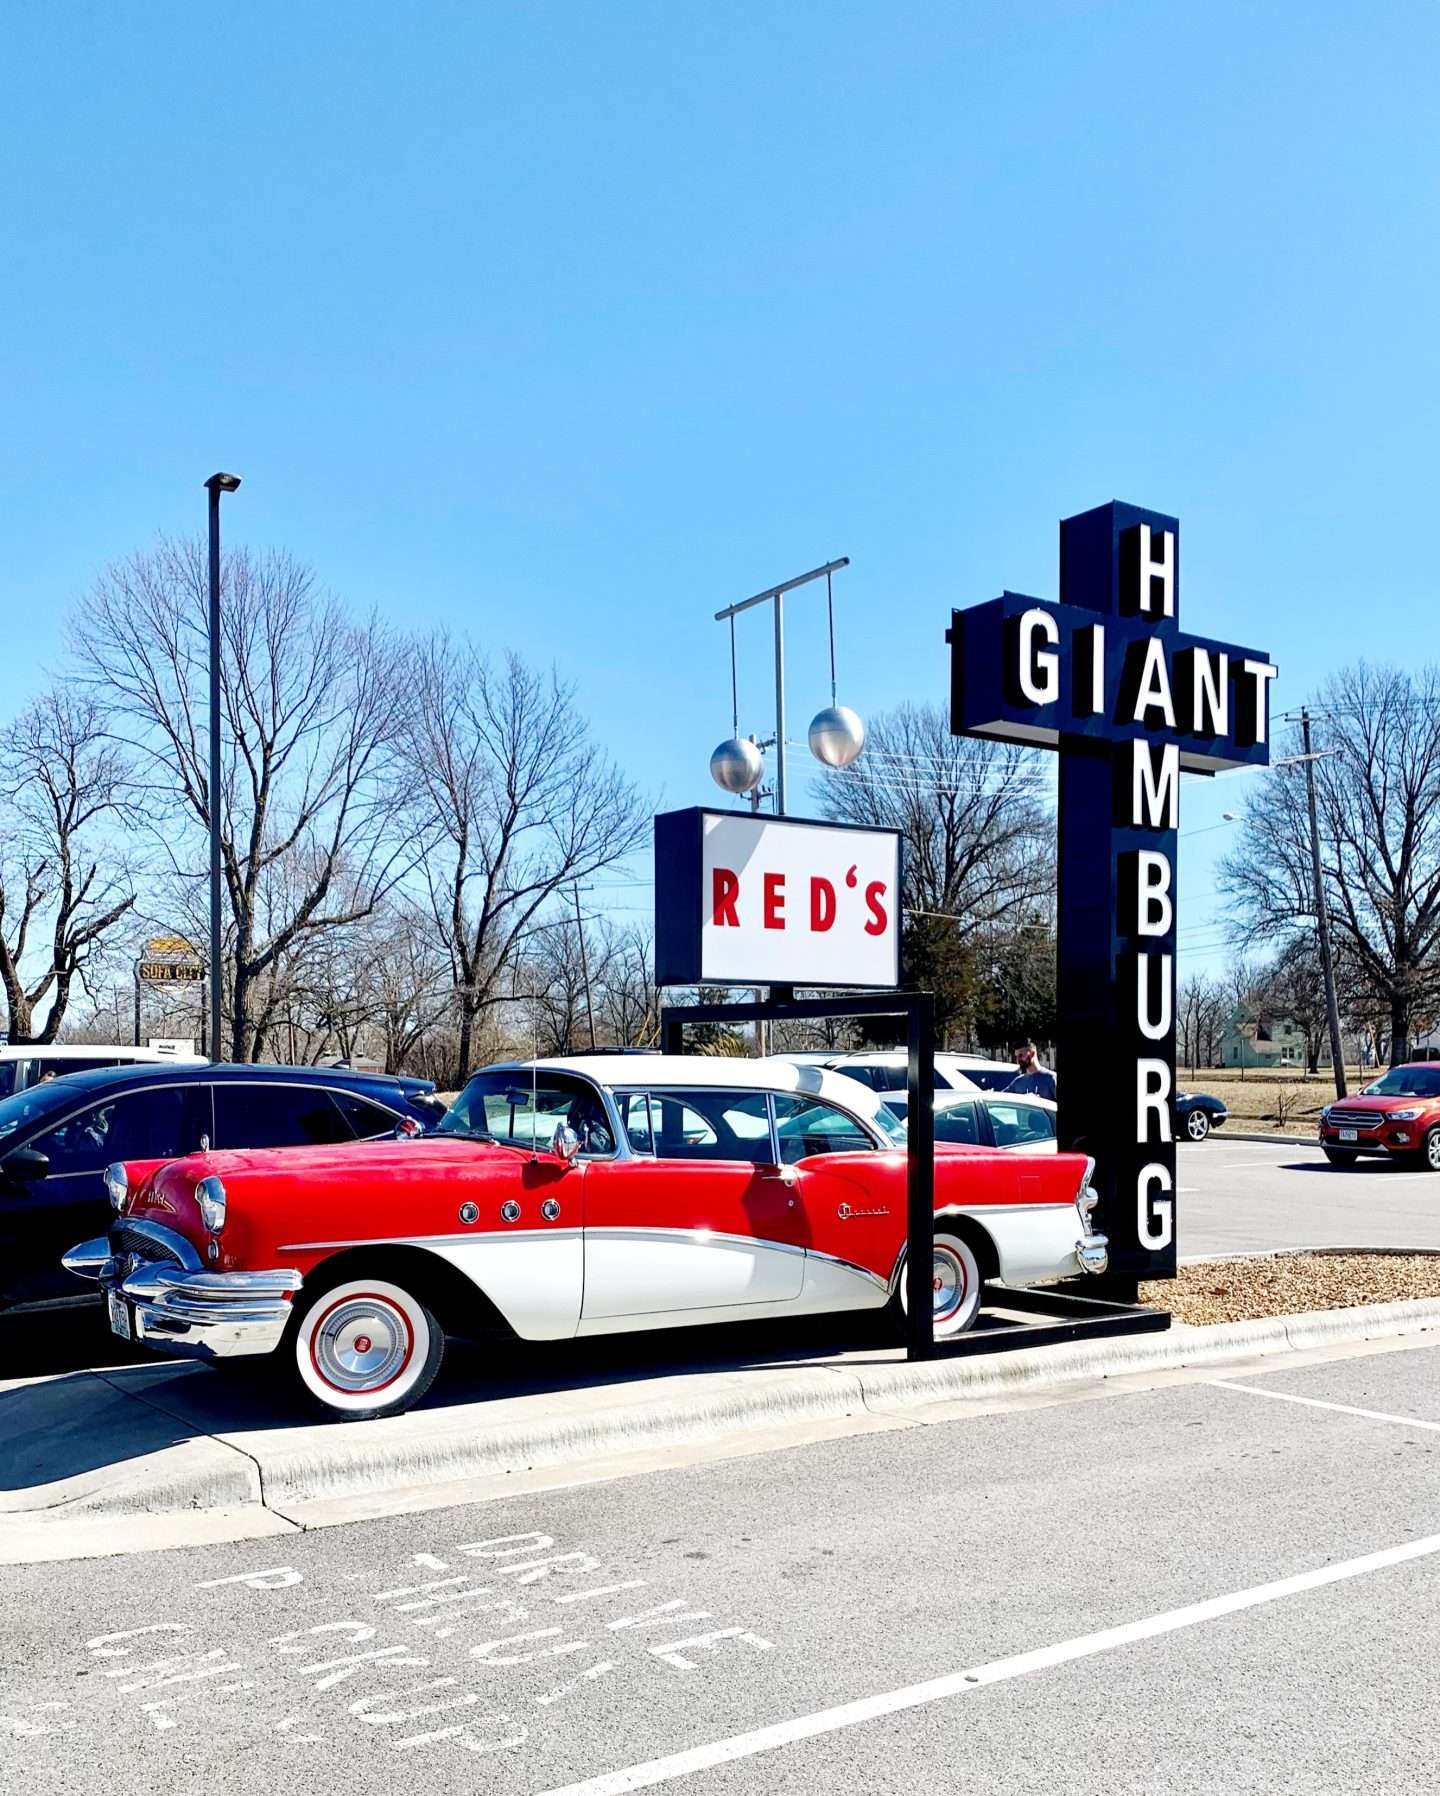 things to do in Springfield, MO: have lunch at Red's Giant Hamburg